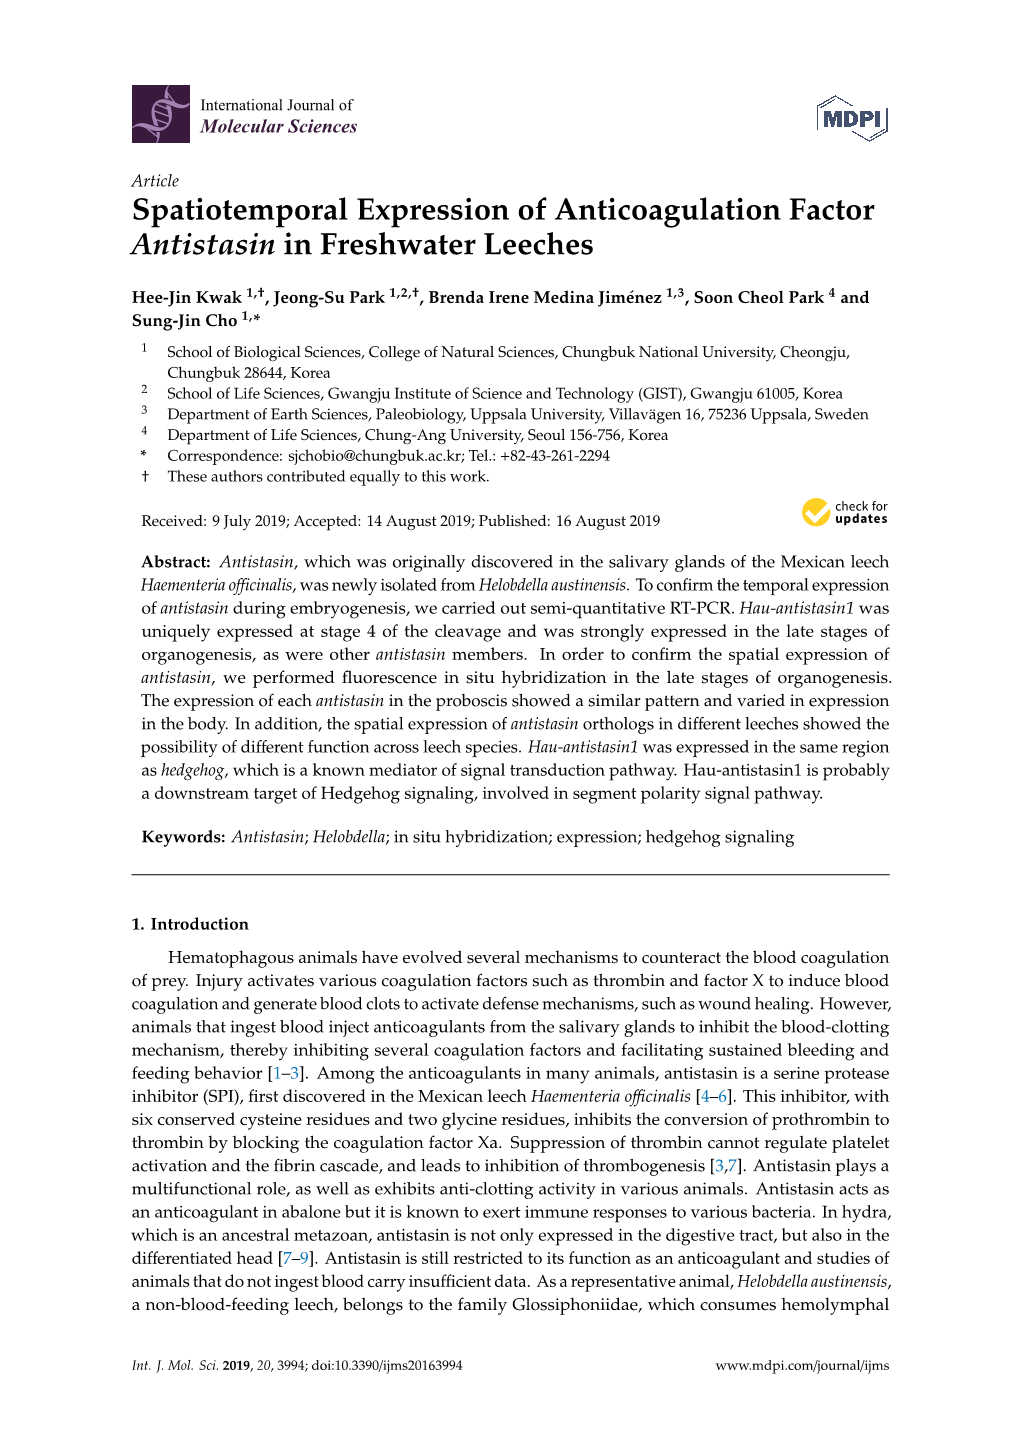 Spatiotemporal Expression of Anticoagulation Factor Antistasin in Freshwater Leeches